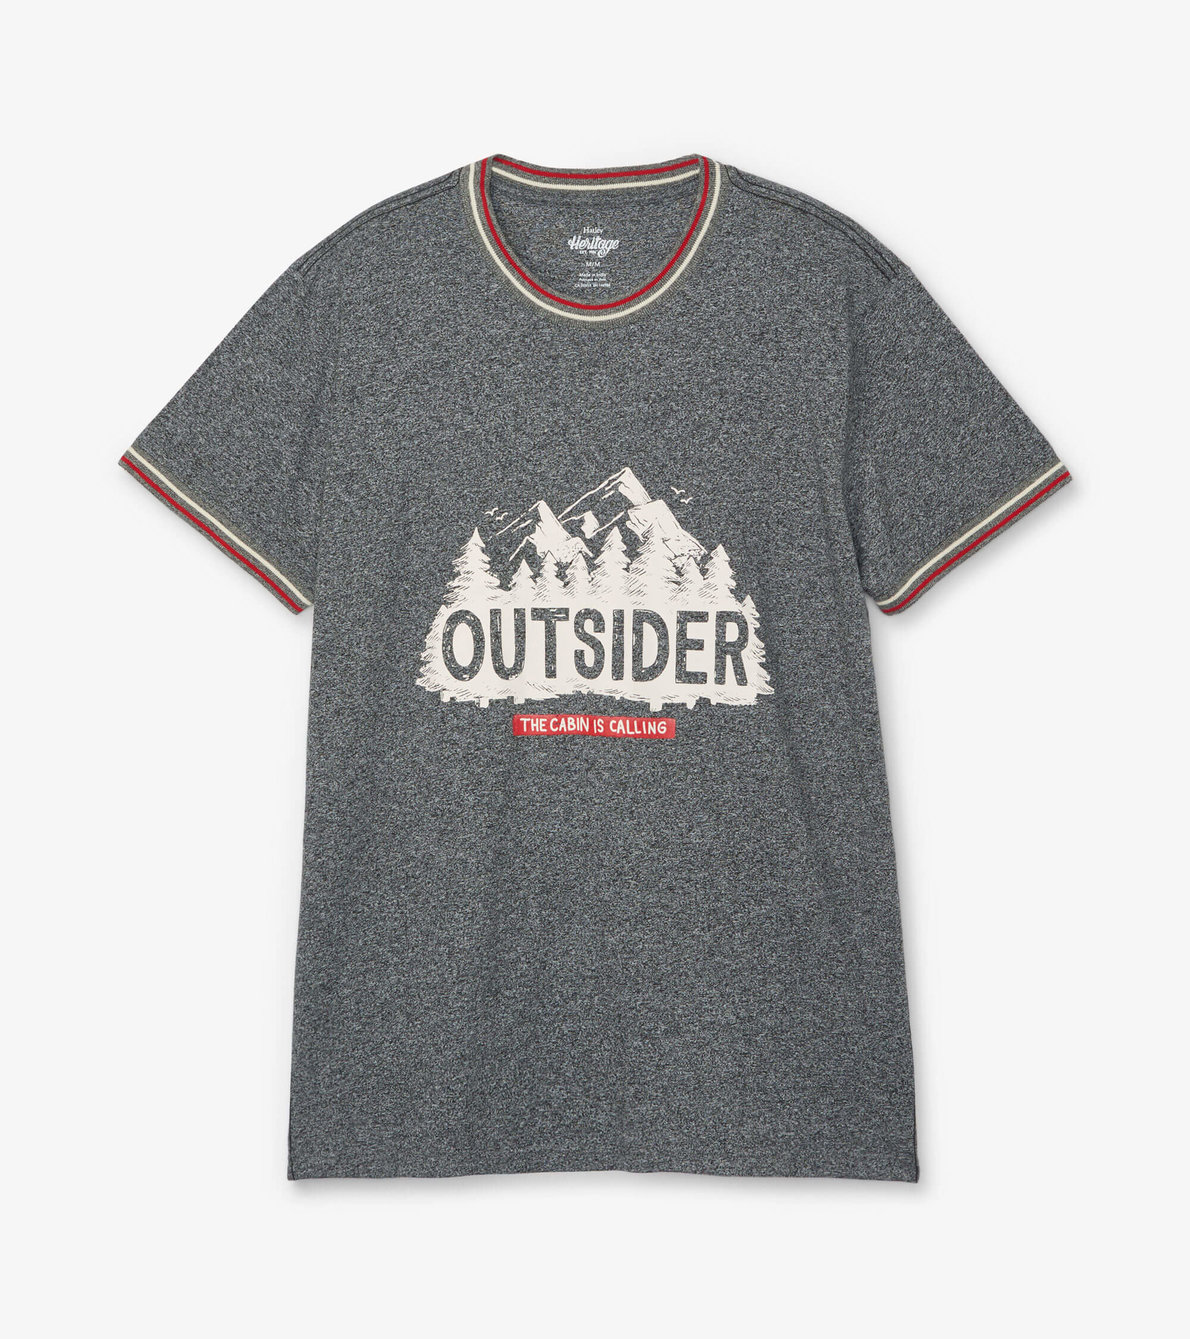 View larger image of Outsider Men's Heritage Tee